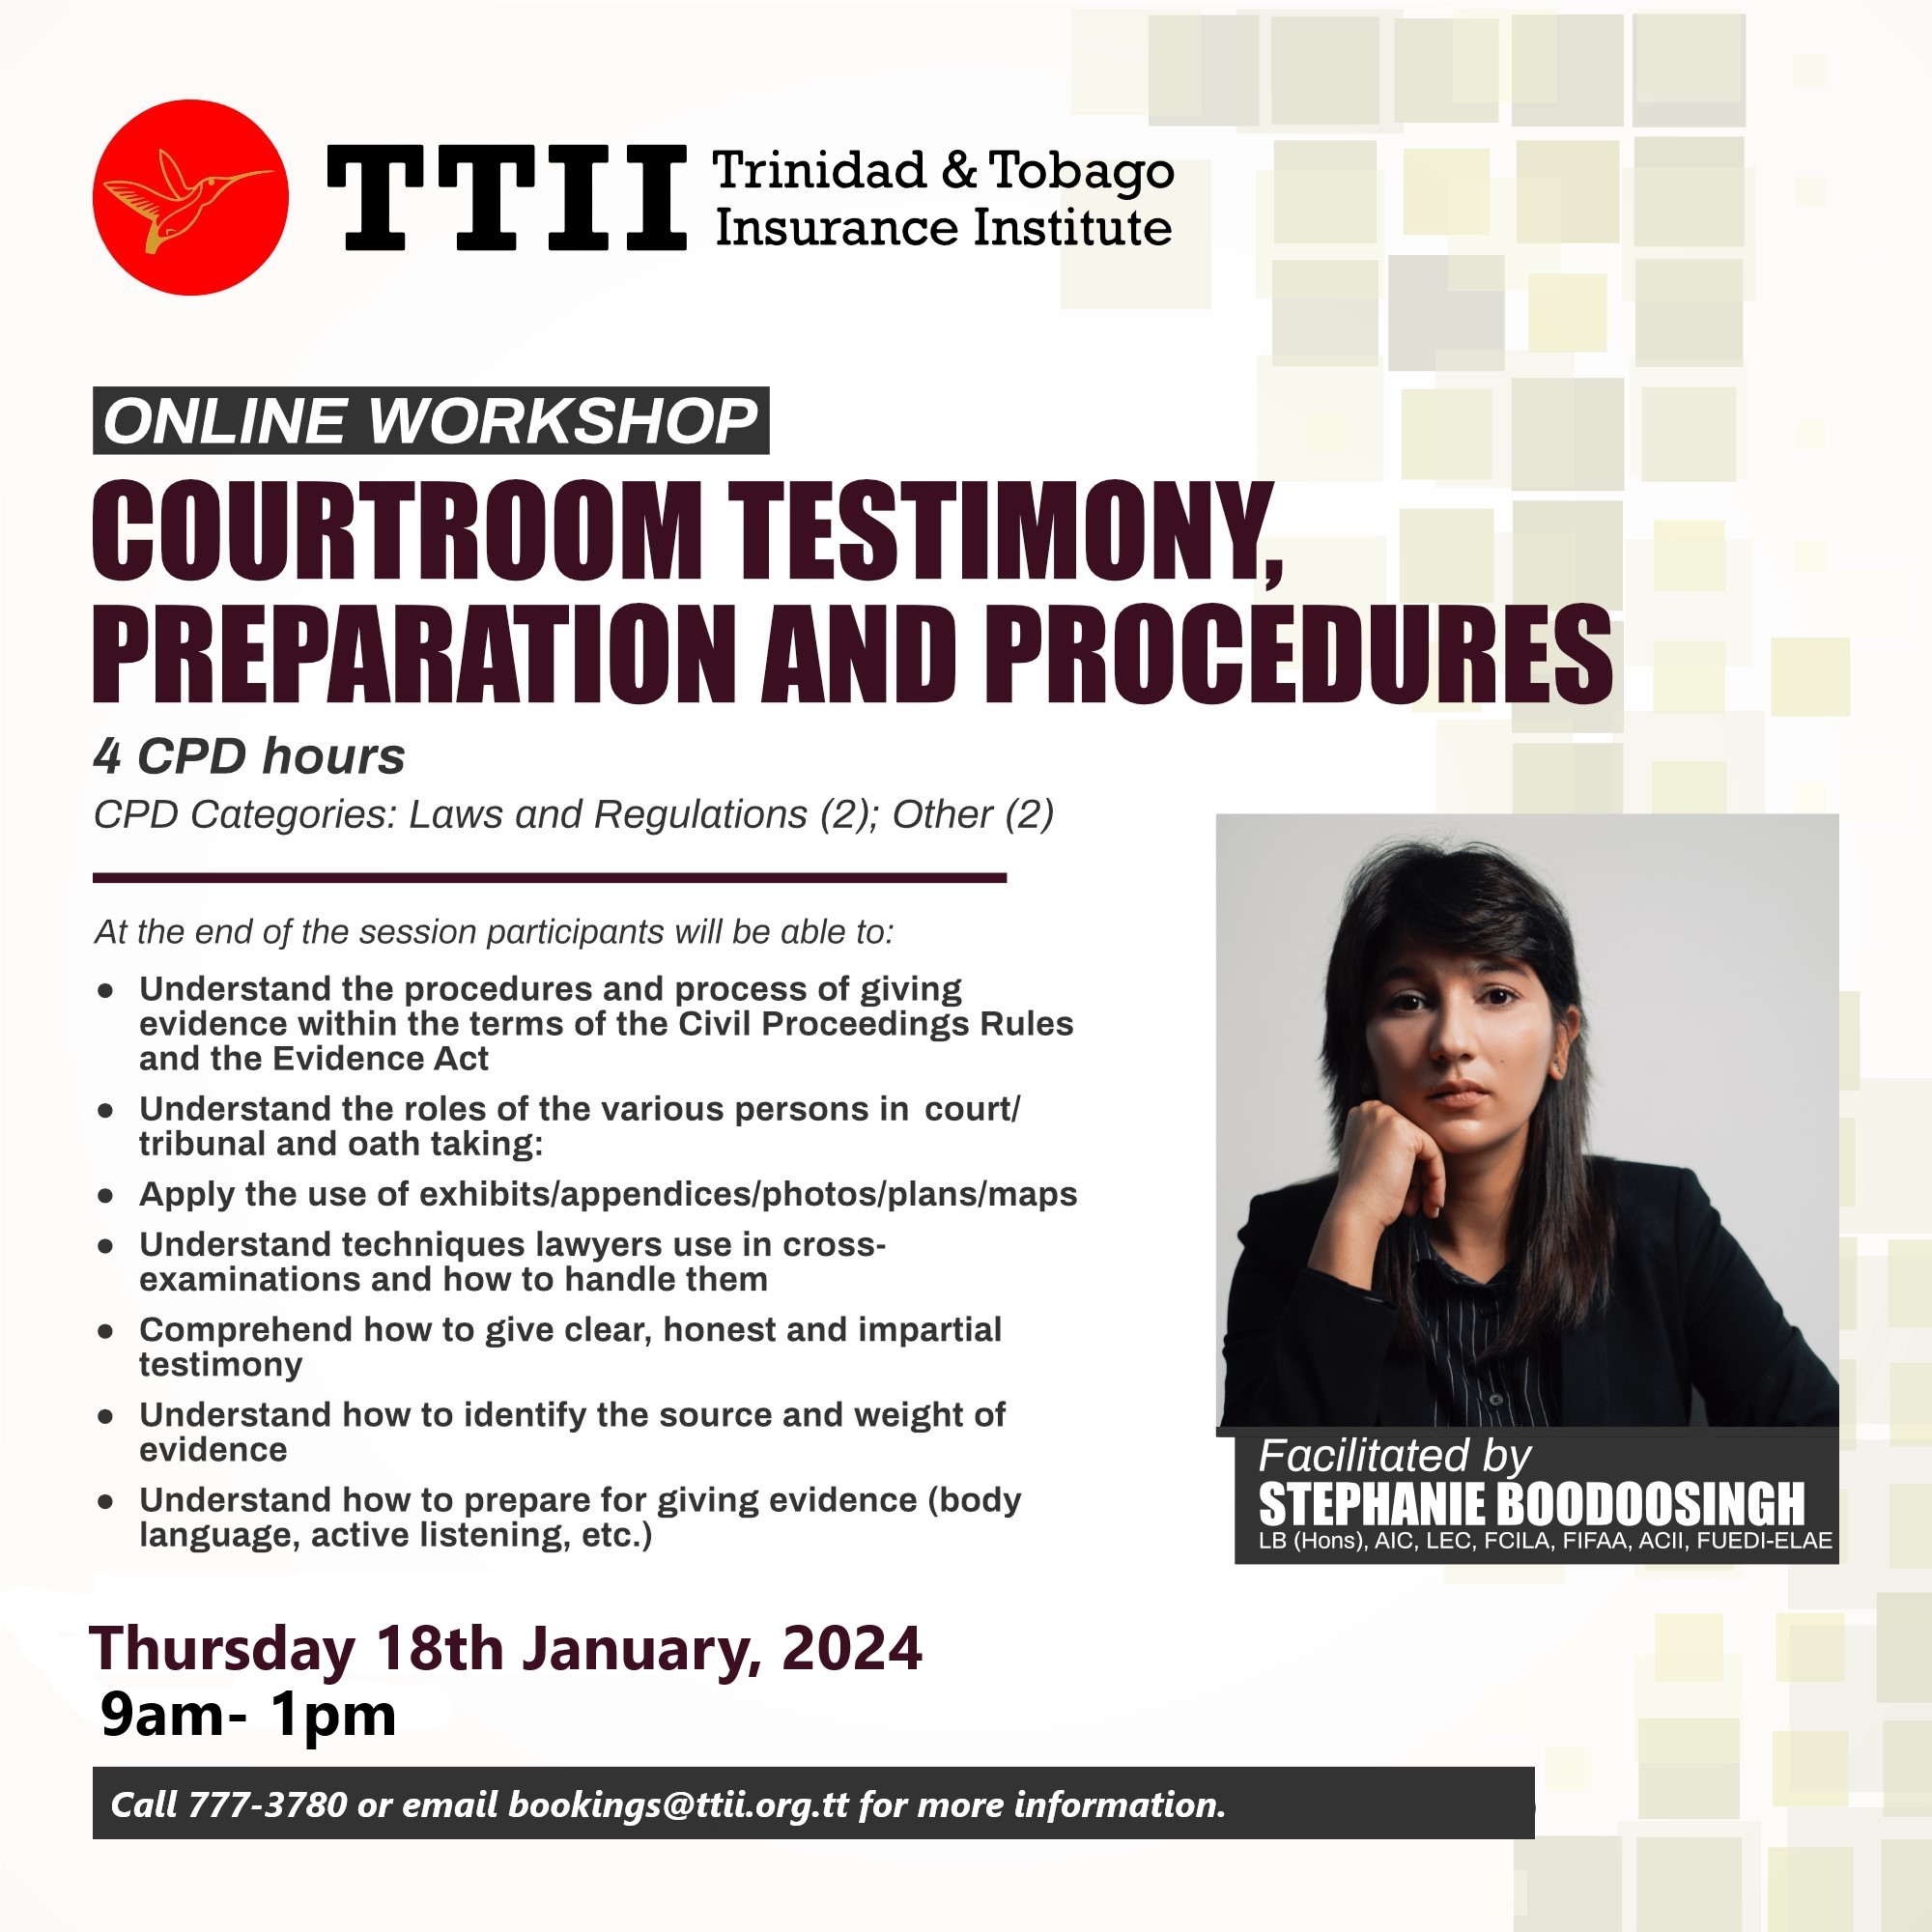 Courtroom Testimony, Preparation and Procedures